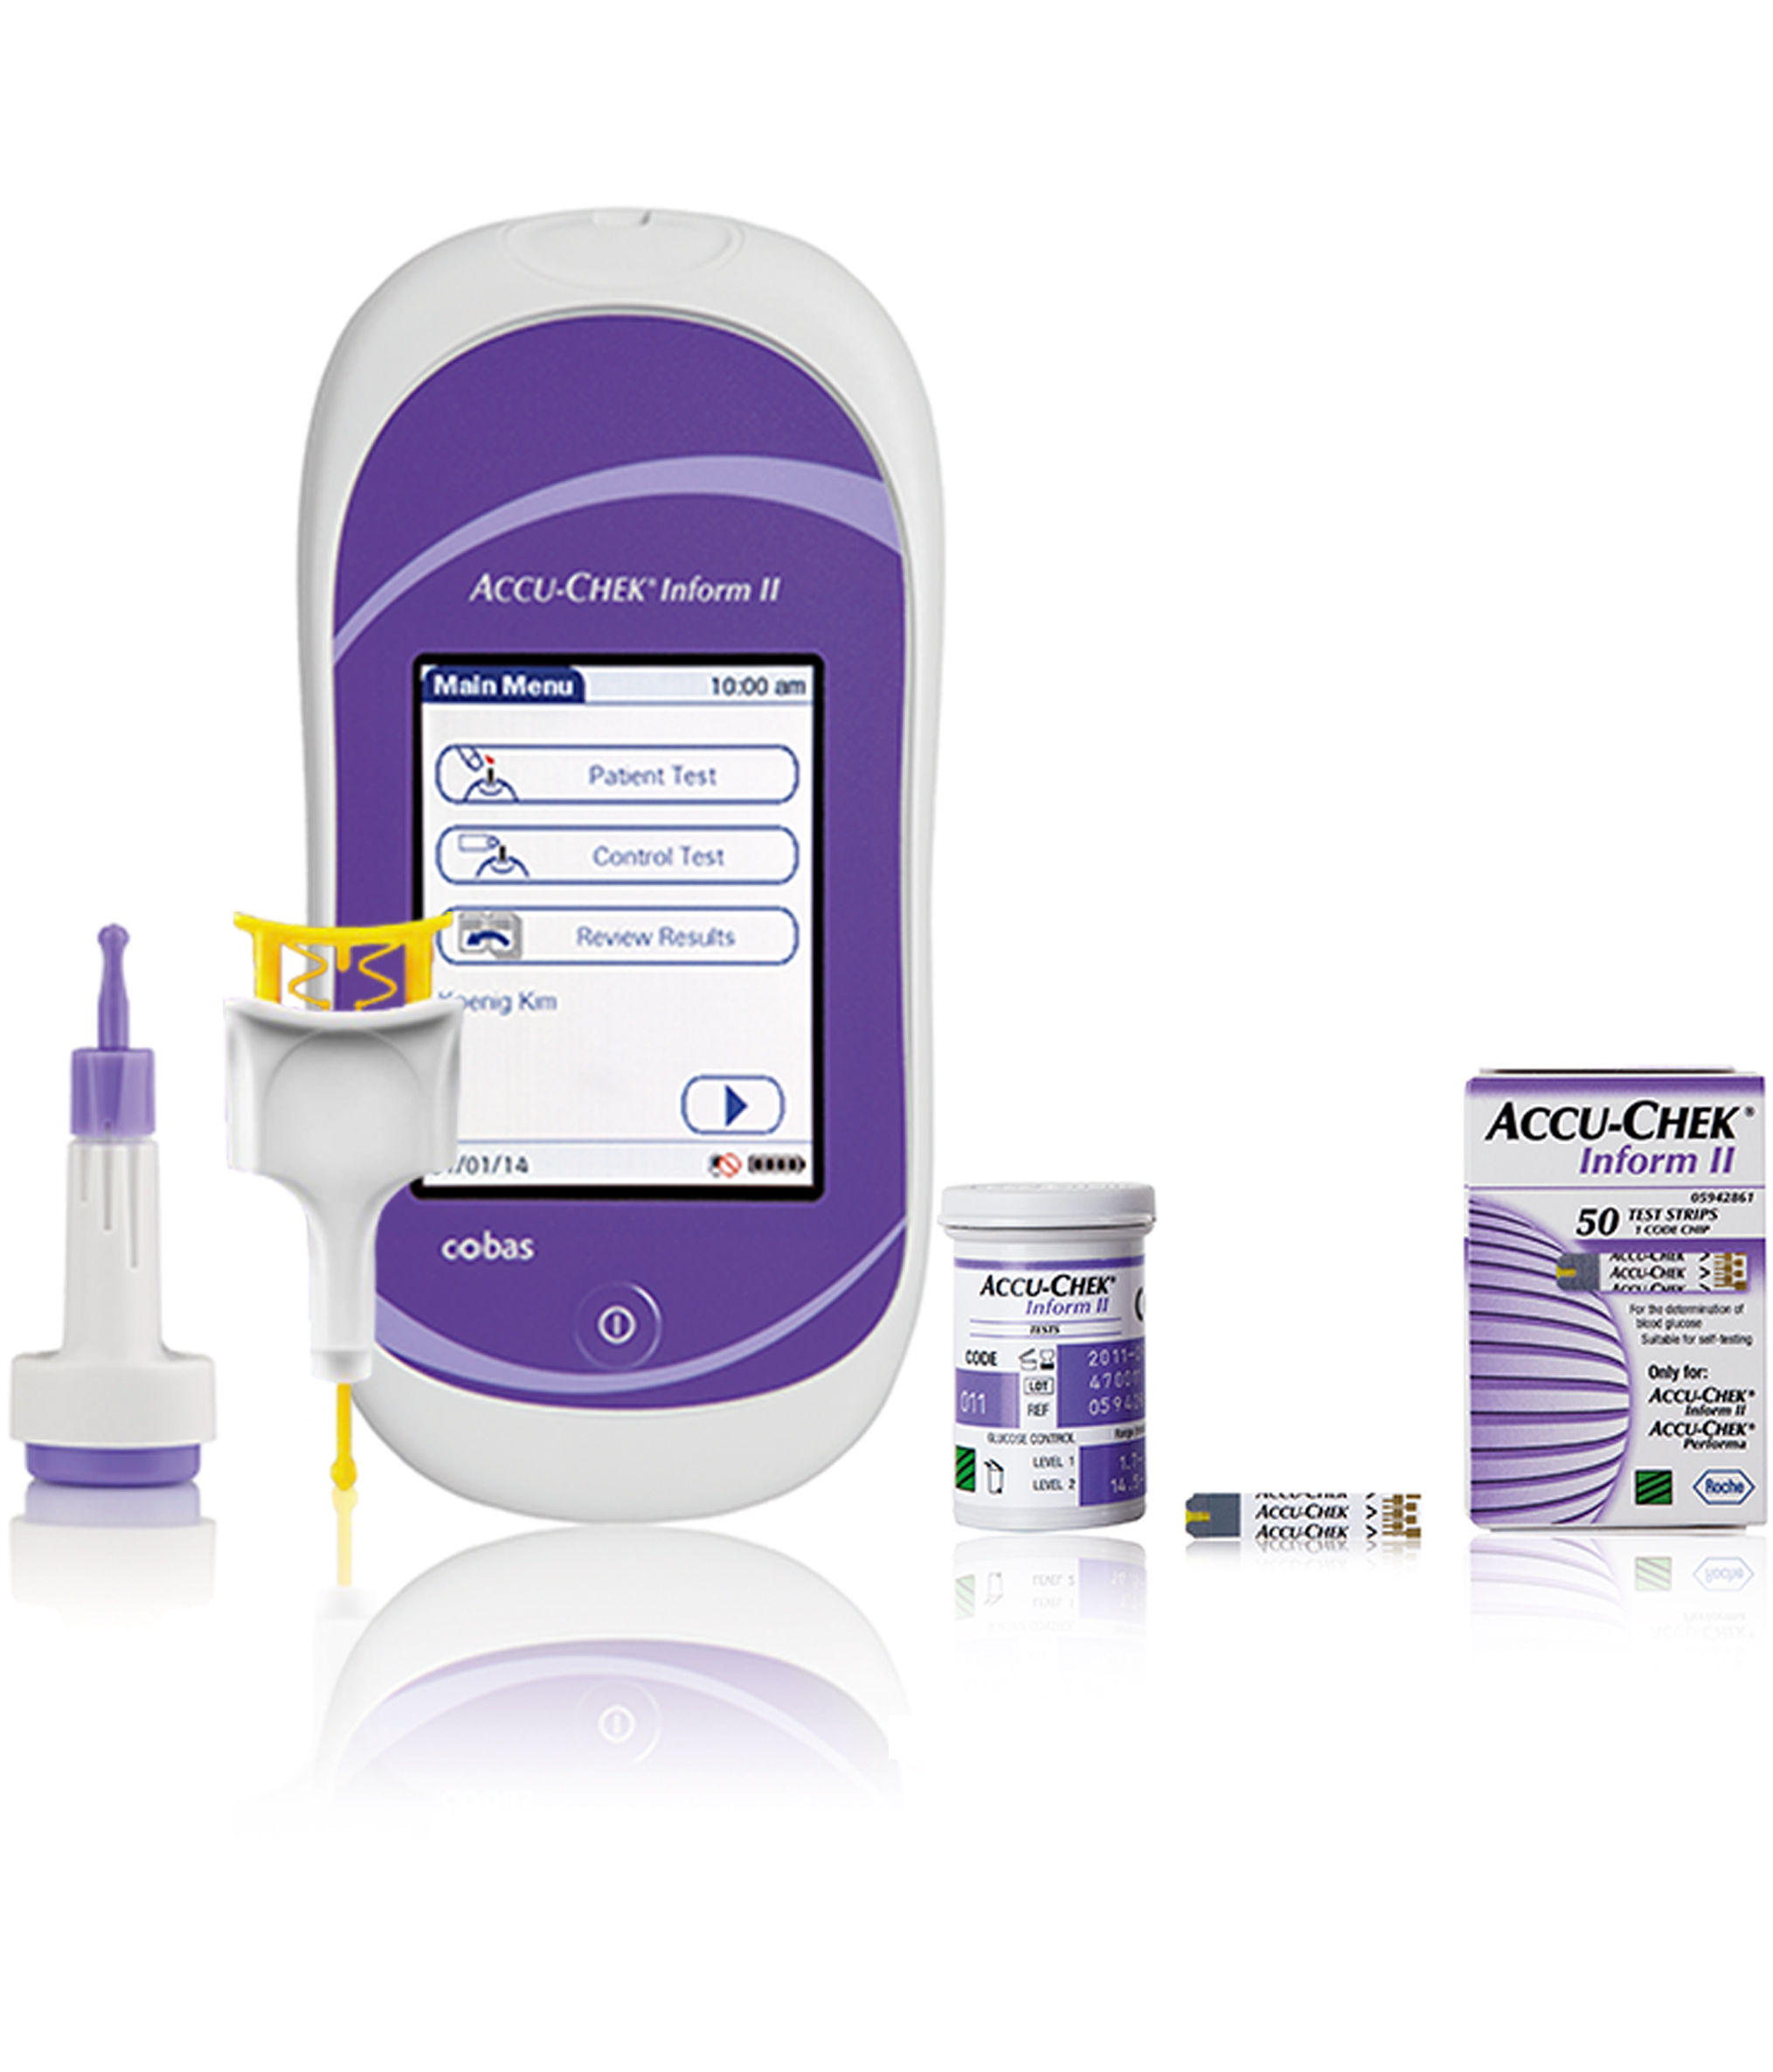 Accu-Chek Inform II System from Roche Applied Science - a member of the  Roche Group